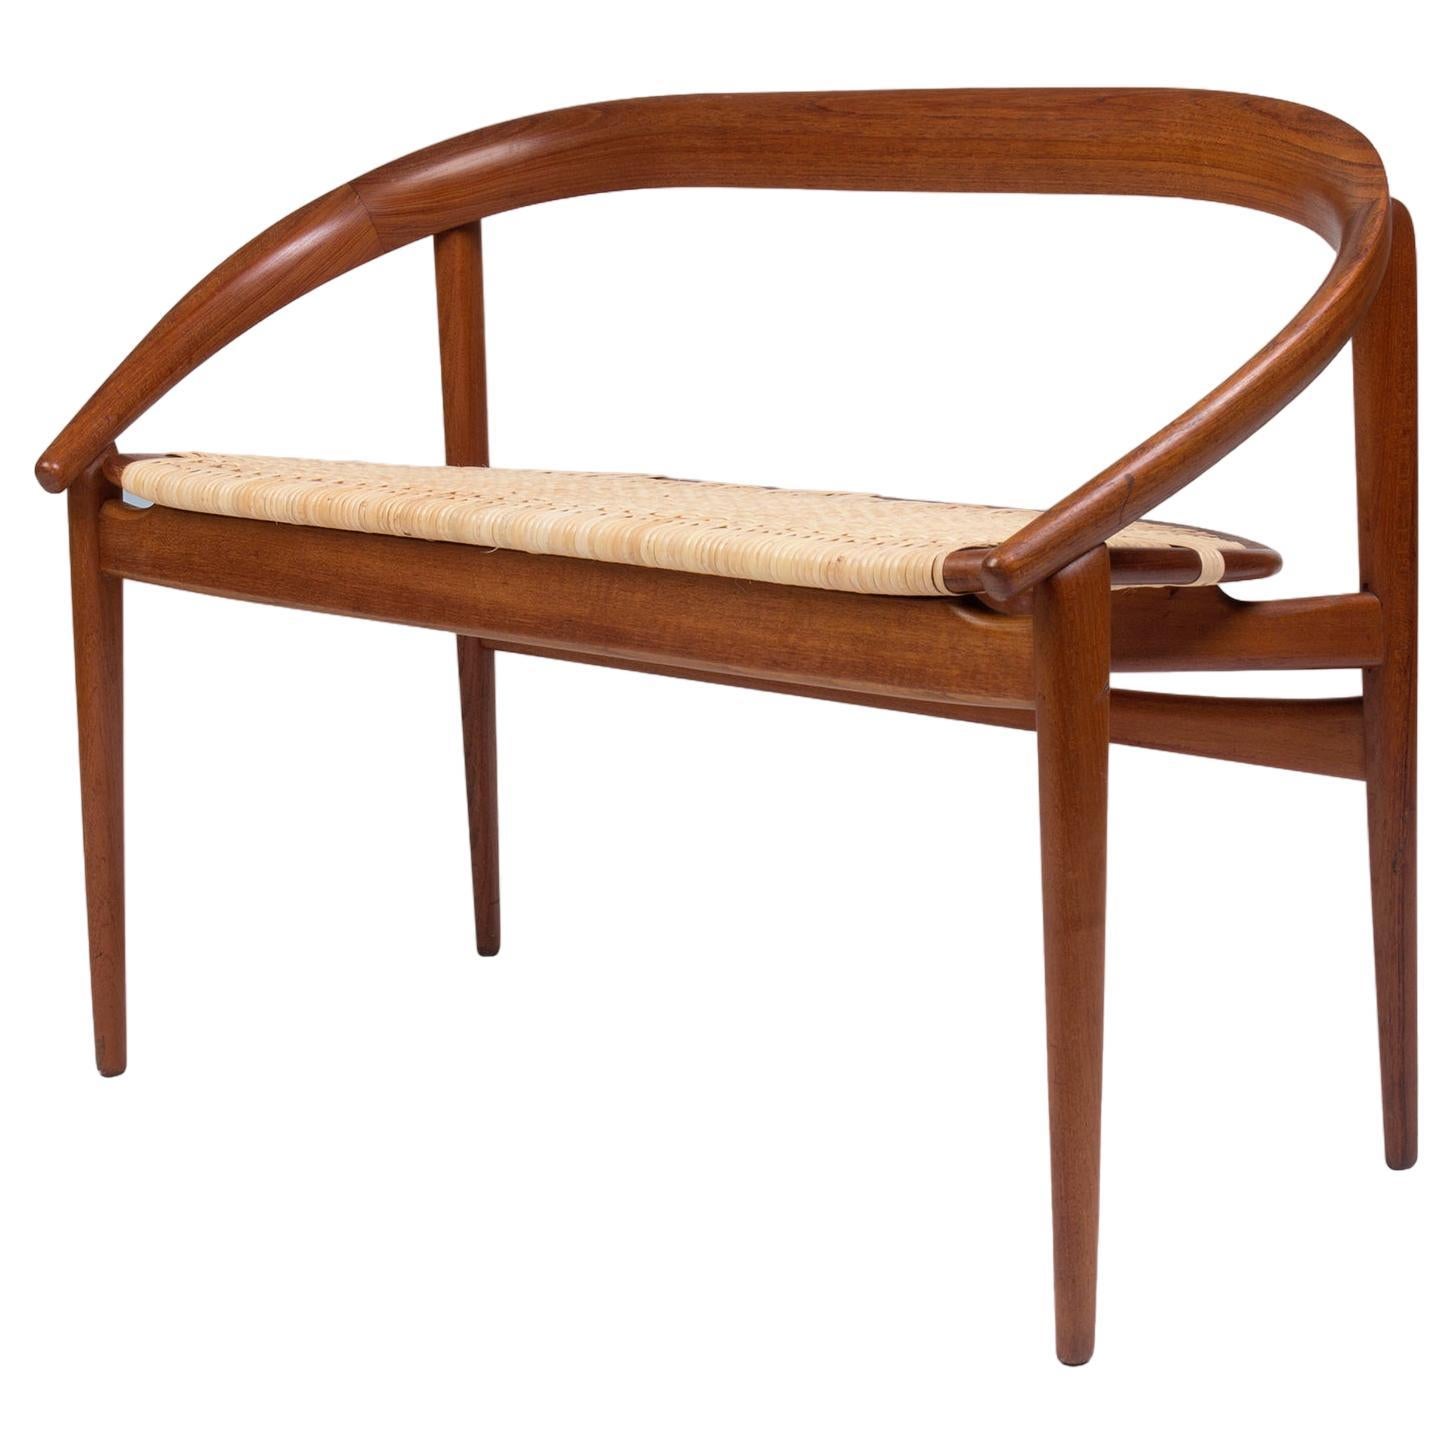 Petite Danish modern sofa with horseshoe curved teak and woven light cane seat For Sale